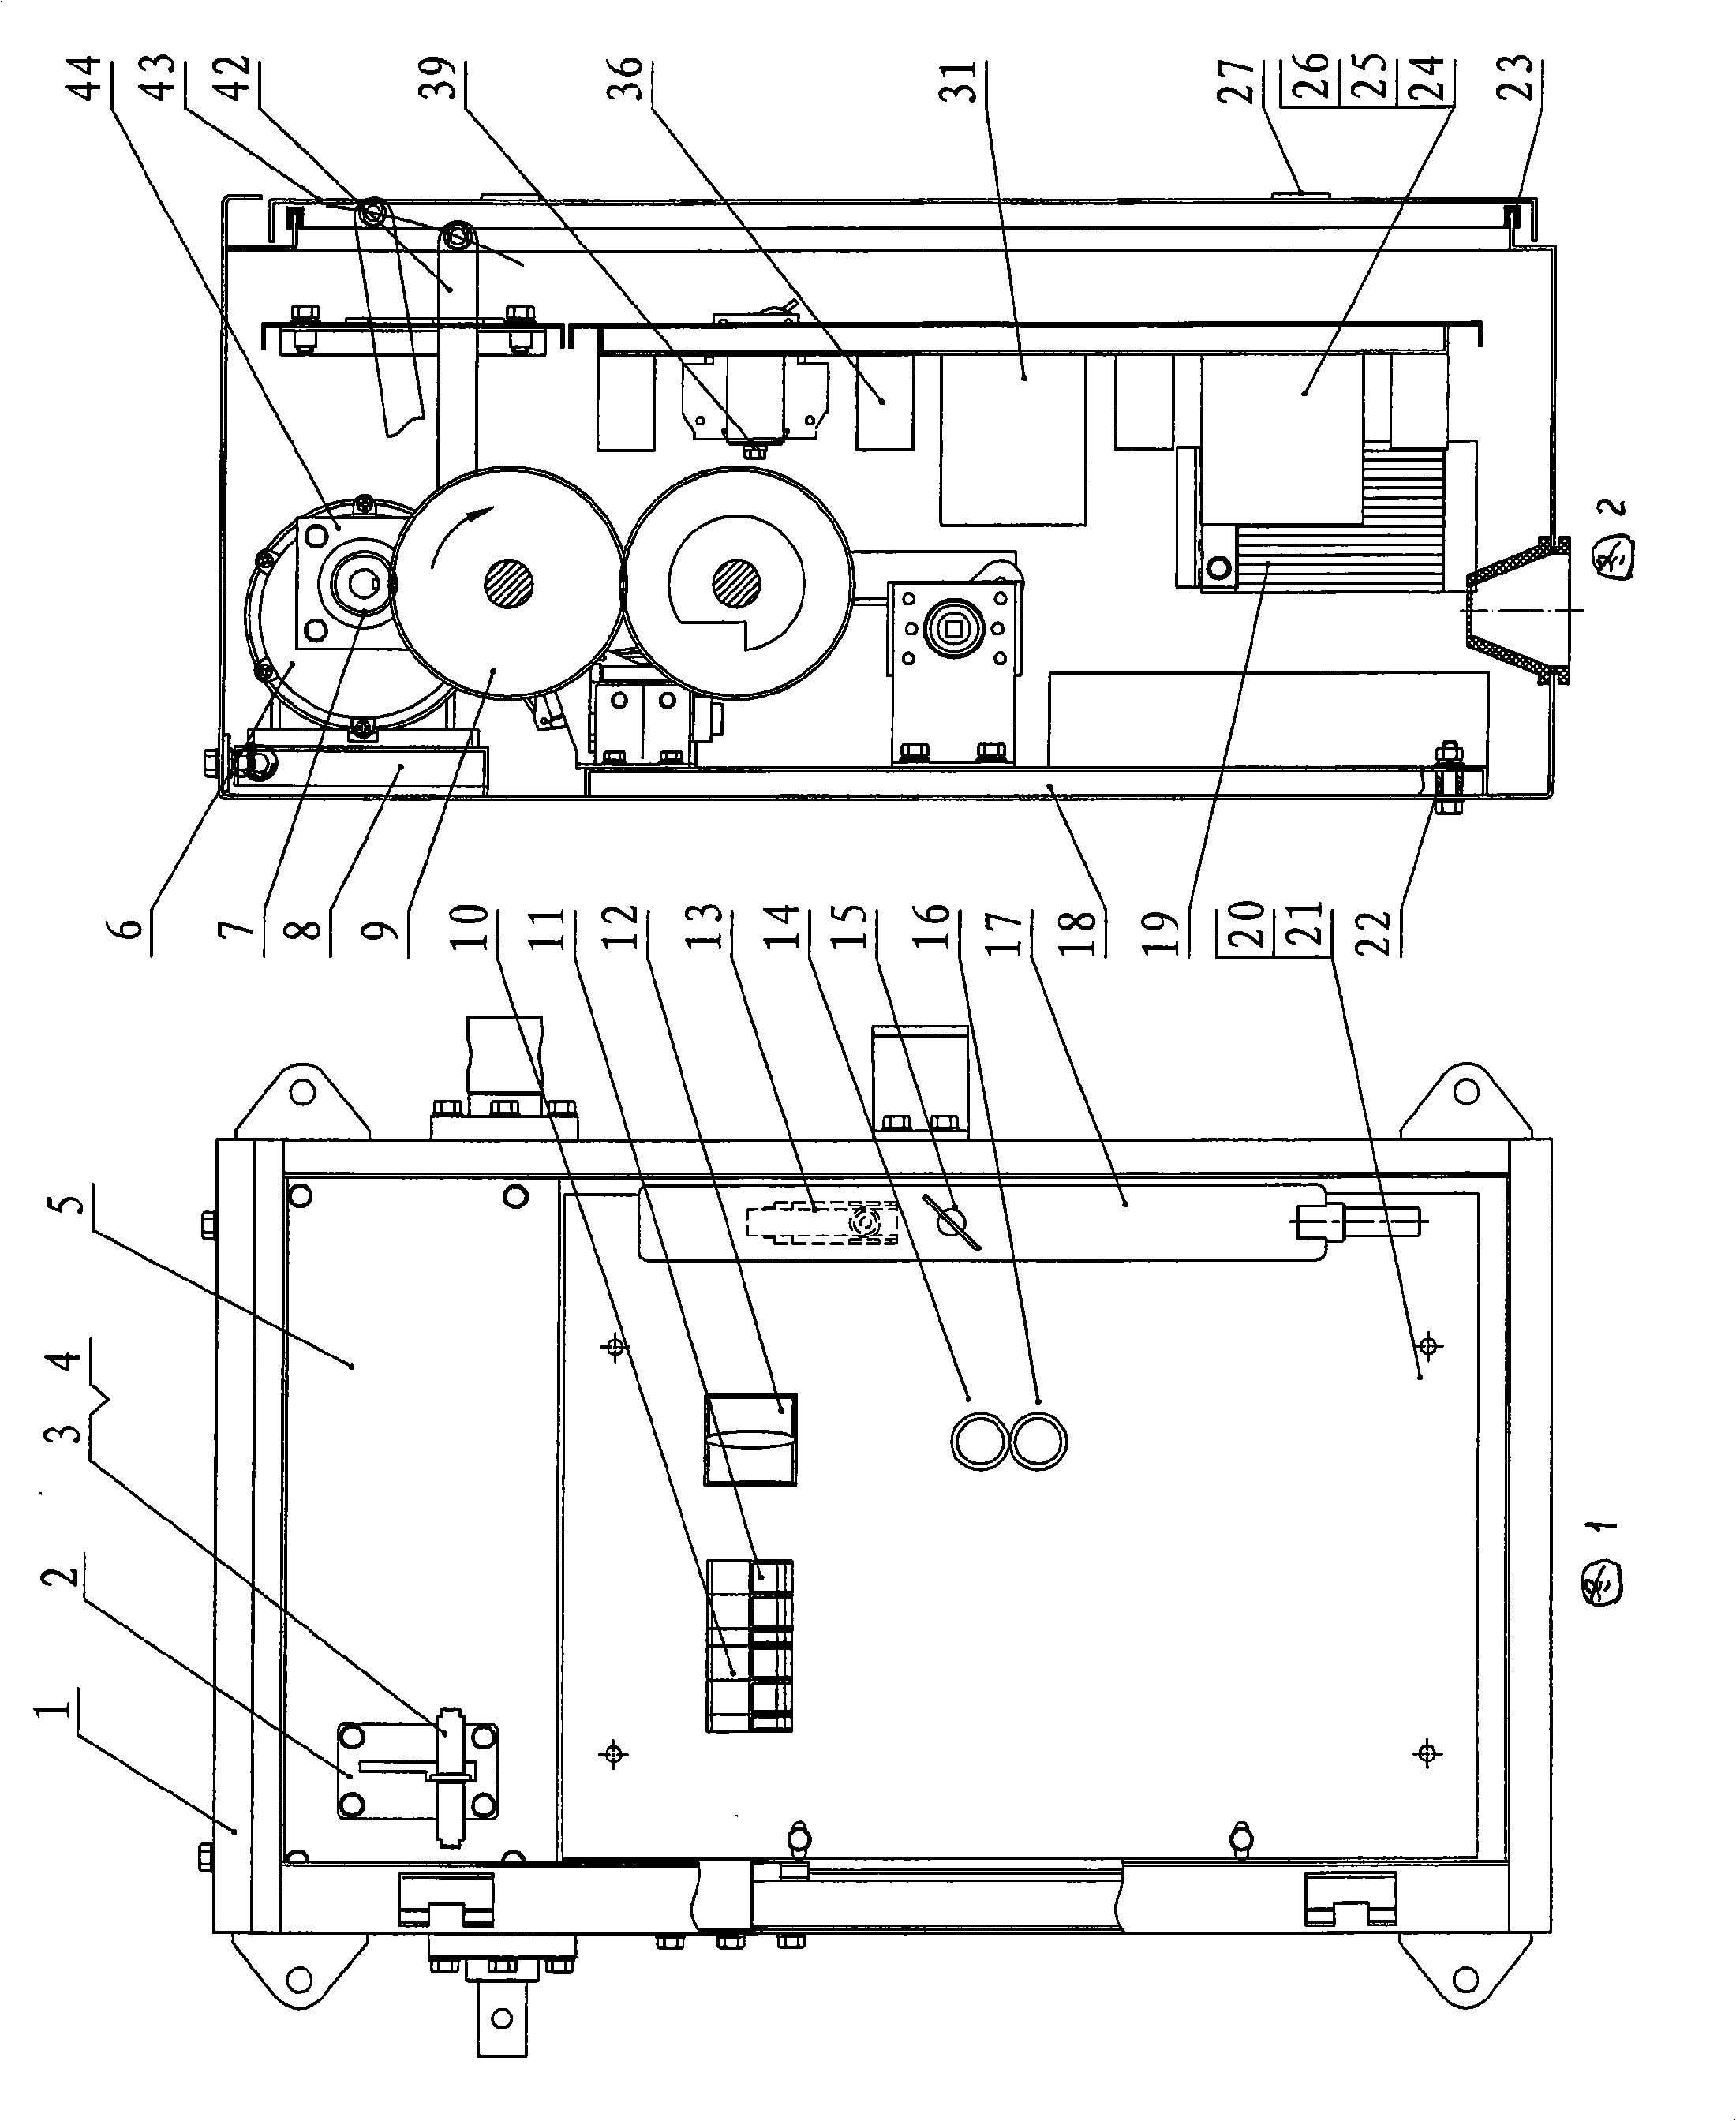 Electrical control apparatus for bipolar isolation switch of railway traffic